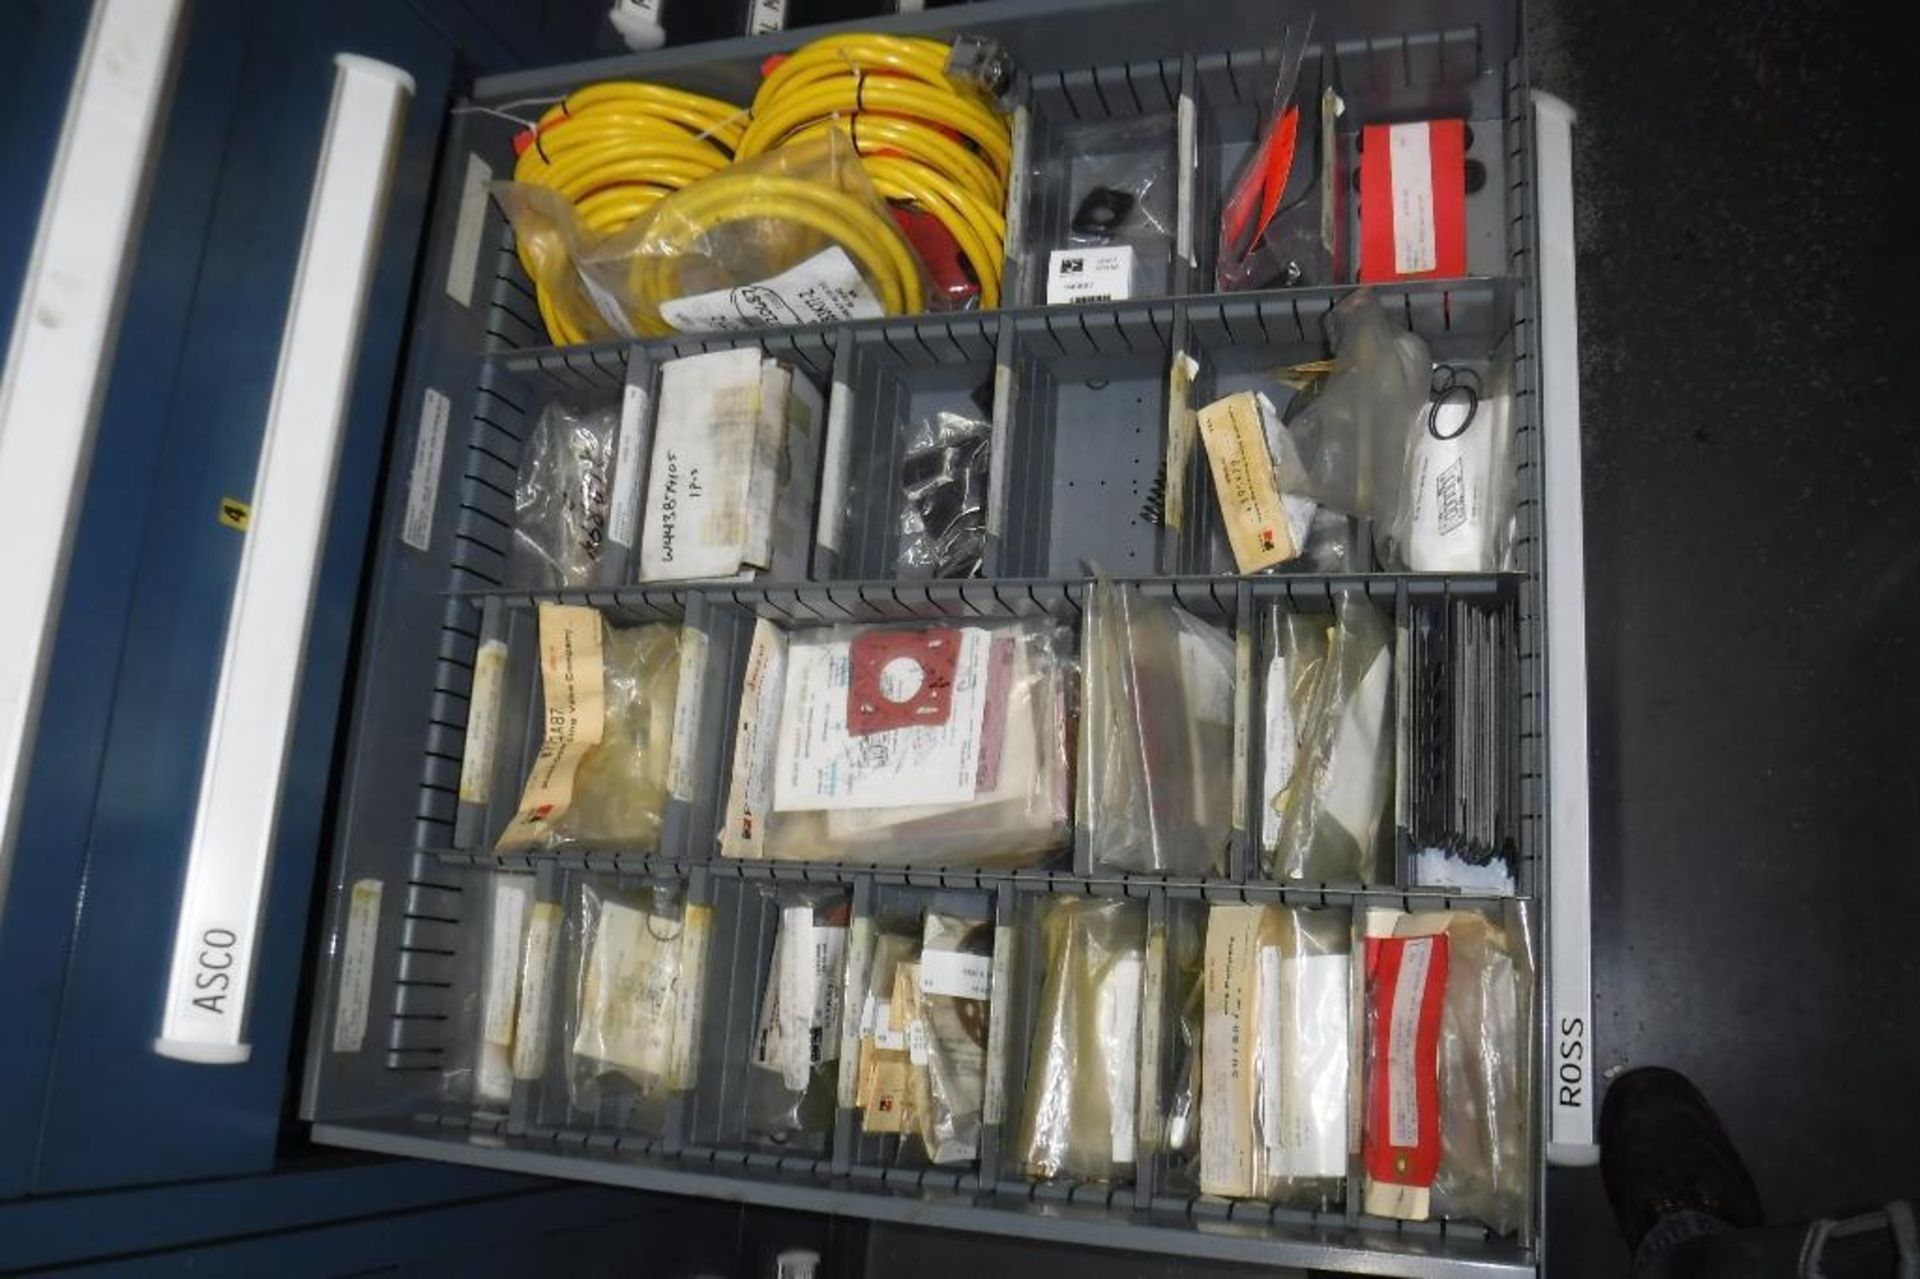 8-Drawer Vidmar Cabinet with Contents-Automatic Valve Corp., ASCO, Ross, Automatic Allenair, Whitelo - Image 5 of 13